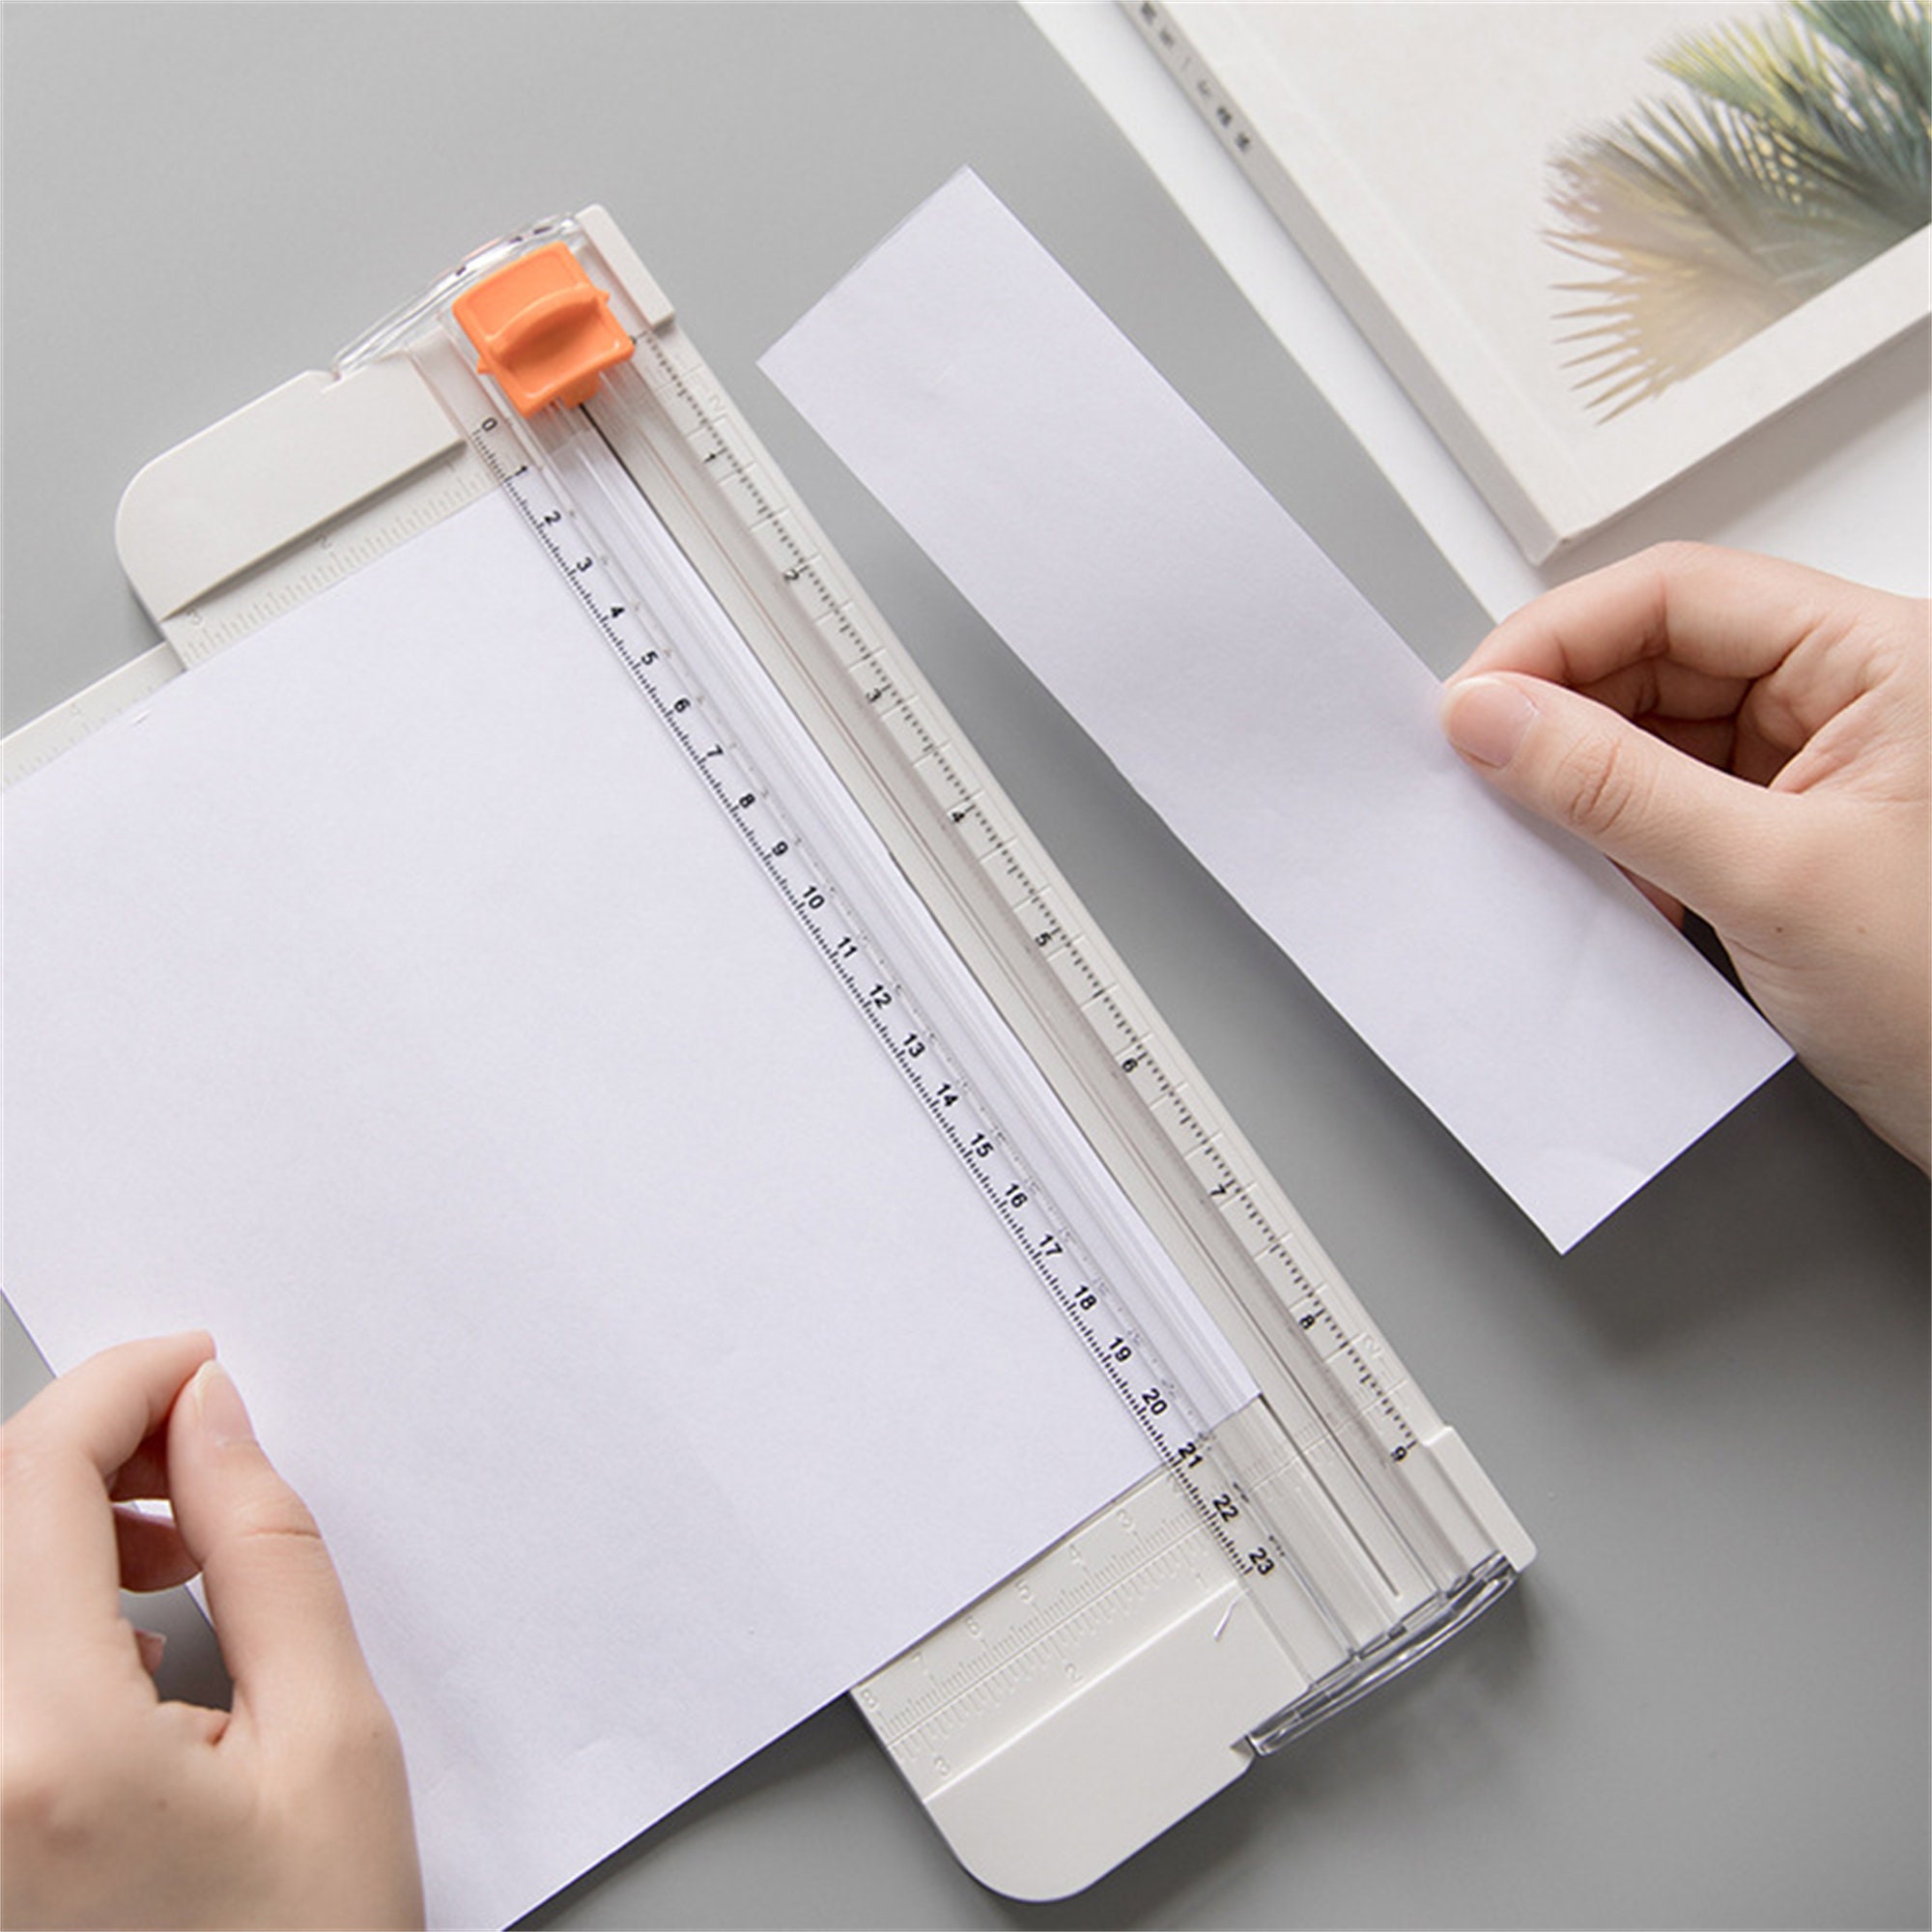 Paper Cutter Mini Paper Trimmer Guillotine Cutter 6 Inch (155mm) Grid Line  Panel Scale Paper Cutter for Craft Paper Photos Cards Scrapbooking Office